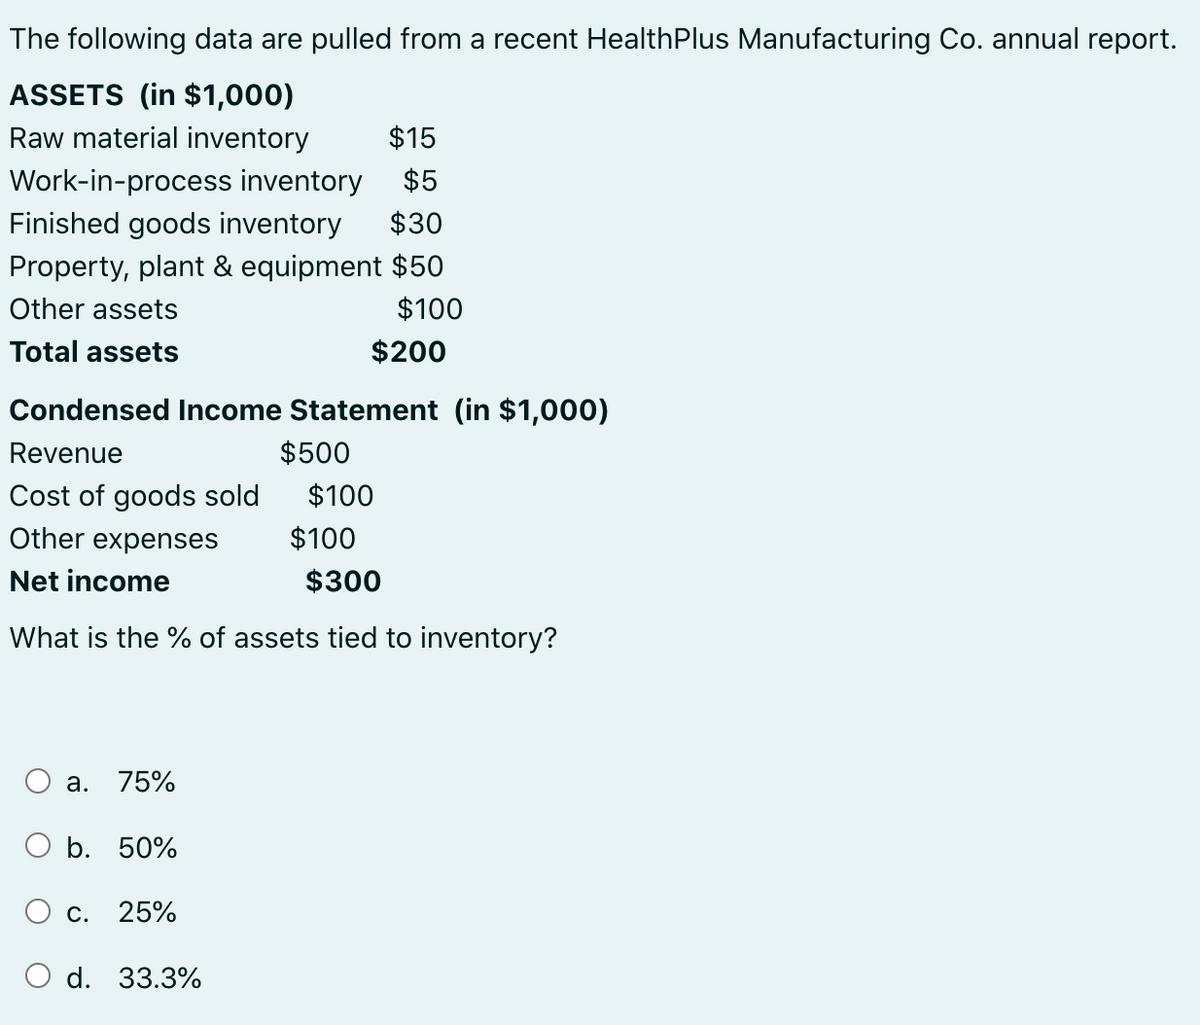 The following data are pulled from a recent HealthPlus Manufacturing Co. annual report.
ASSETS (in $1,000)
Raw material inventory
$15
Work-in-process inventory
$5
Finished goods inventory
$30
Property, plant & equipment $50
Other assets
$100
Total assets
$200
Condensed Income Statement (in $1,000)
Revenue
$500
Cost of goods sold
$100
Other expenses
$100
Net income
$300
What is the % of assets tied to inventory?
а.
75%
O b. 50%
С. 25%
O d. 33.3%
